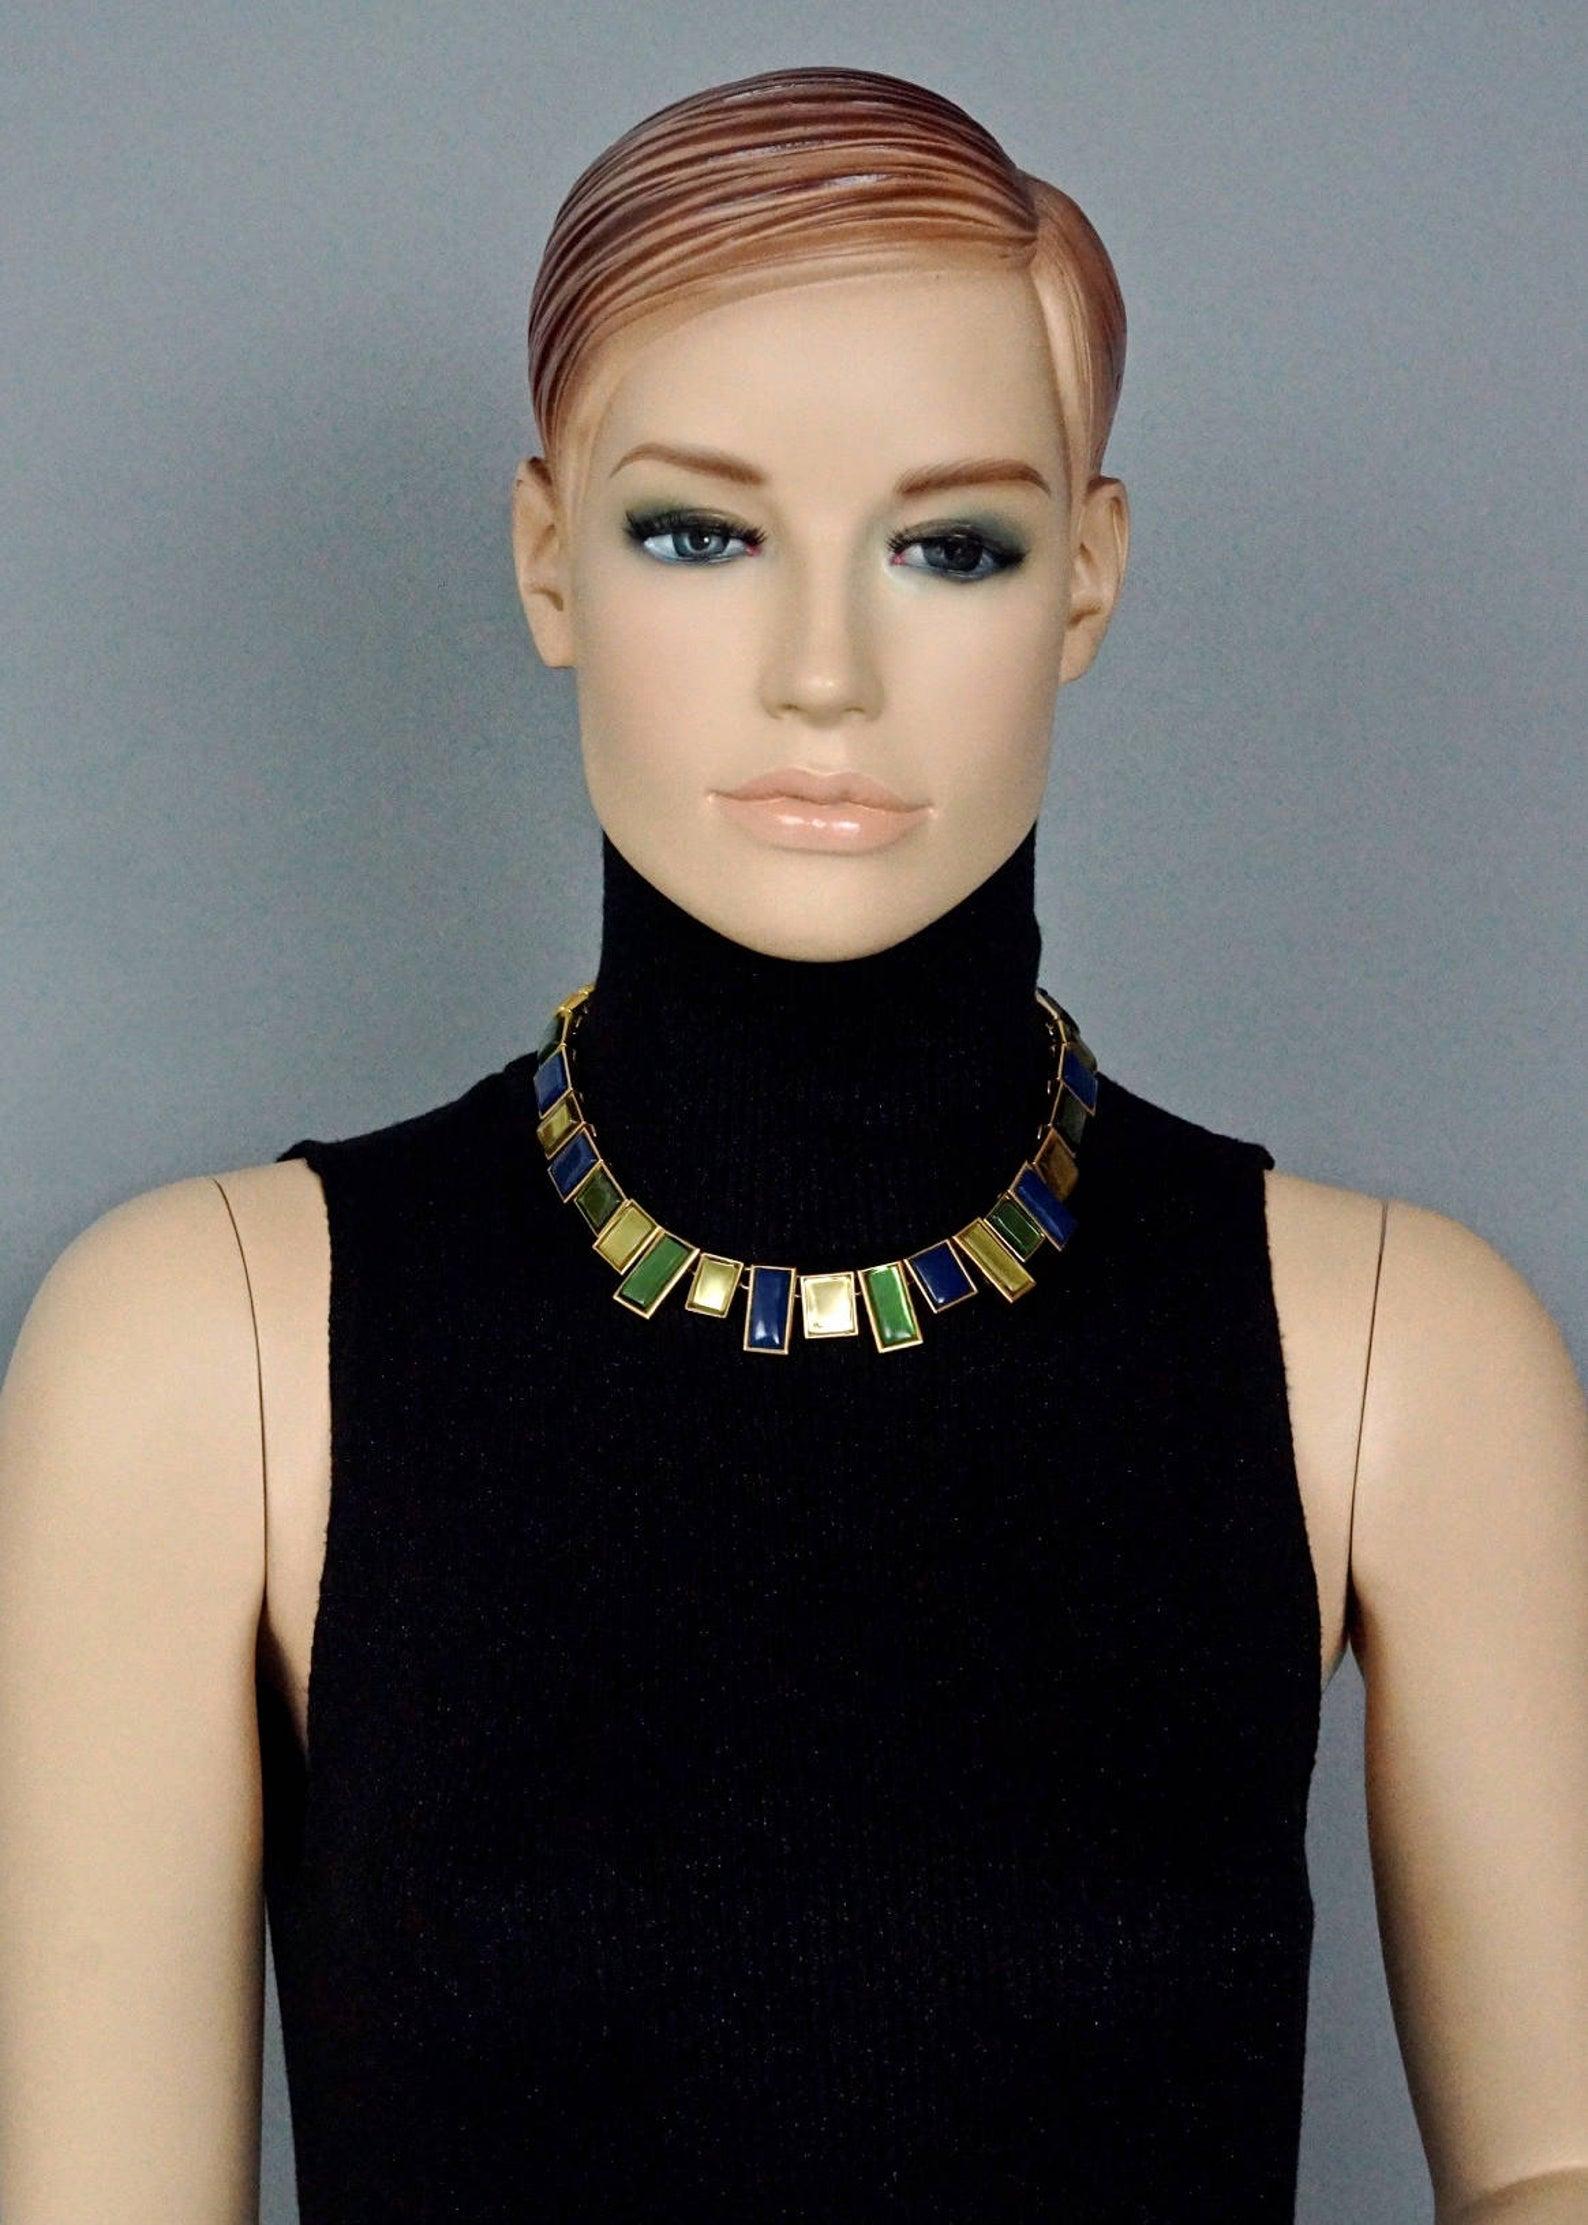 Vintage YVES SAINT LAURENT Ysl Mondrian Geometric Resin Necklace

Measurements:
Height: 0.94 inch (2.4 cm)
Width: 17.32 inches to 20.86 inches (44 cm to 53 cm)

Features:
- 100% Authentic YVES SAINT LAURENT.
- Articulated geometric colored resin in